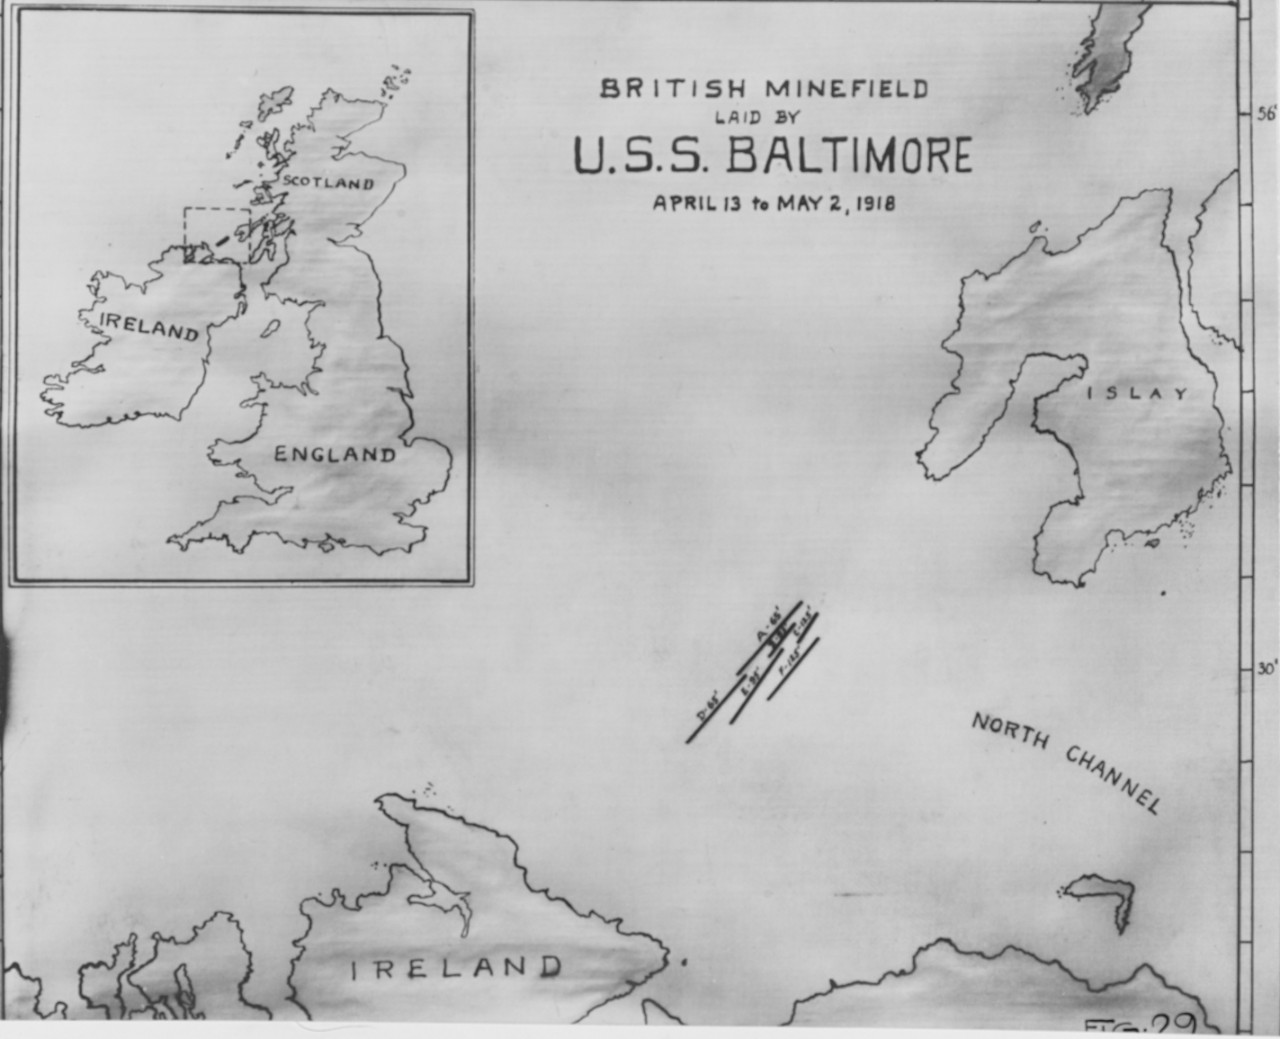 Minefield Laid by USS BALTIMORE